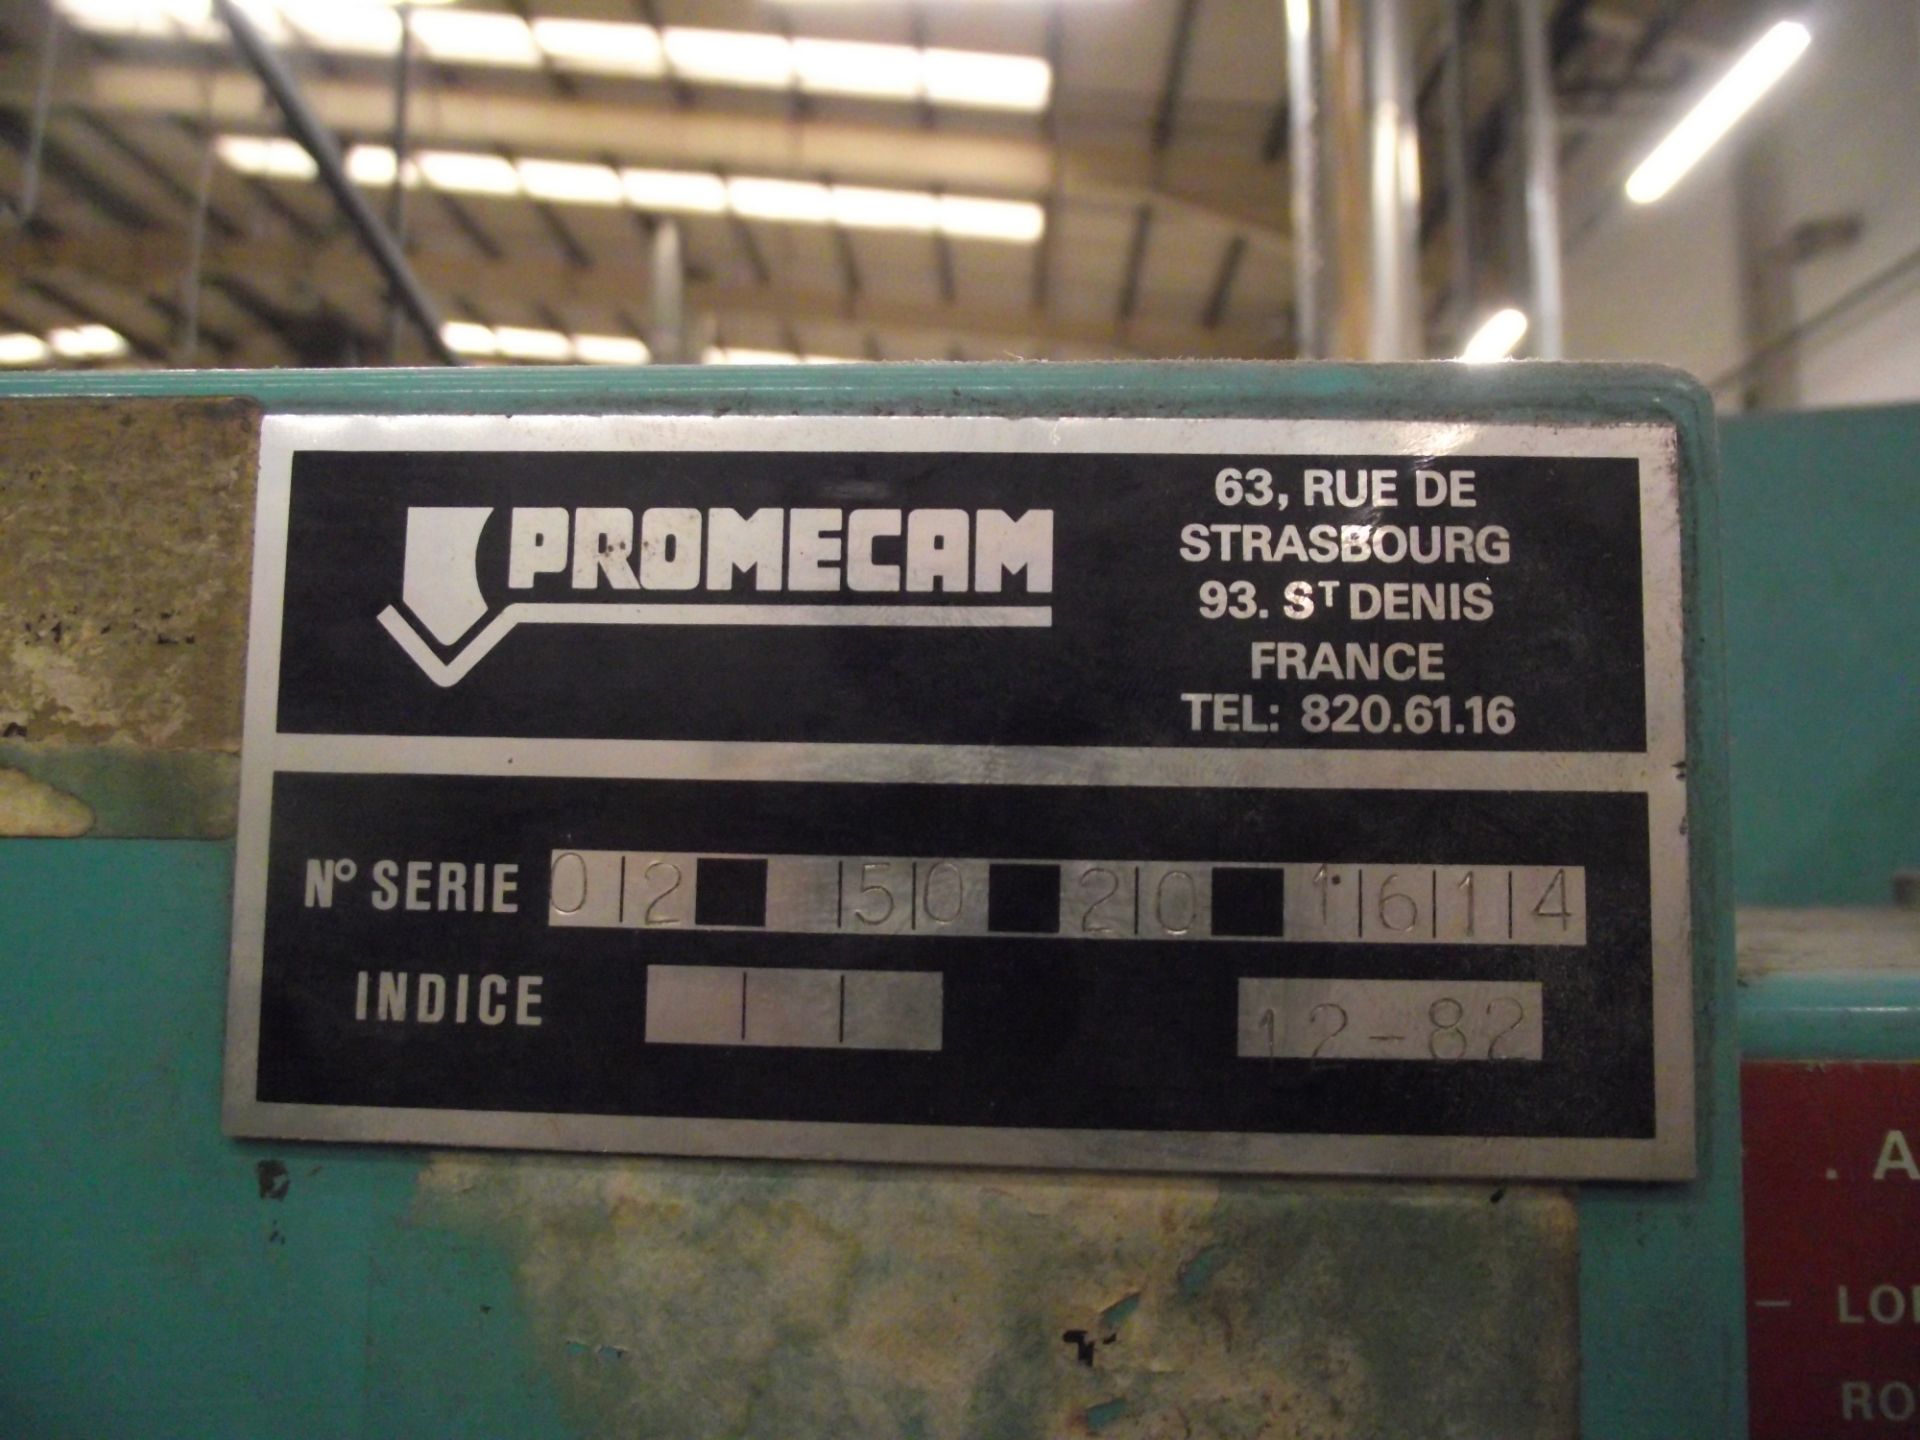 Promecam RG50-20 Pressbrake cw Hurco Autobend 4 Numerical Control,Light Detection & A Qty of Tooling - Image 4 of 15